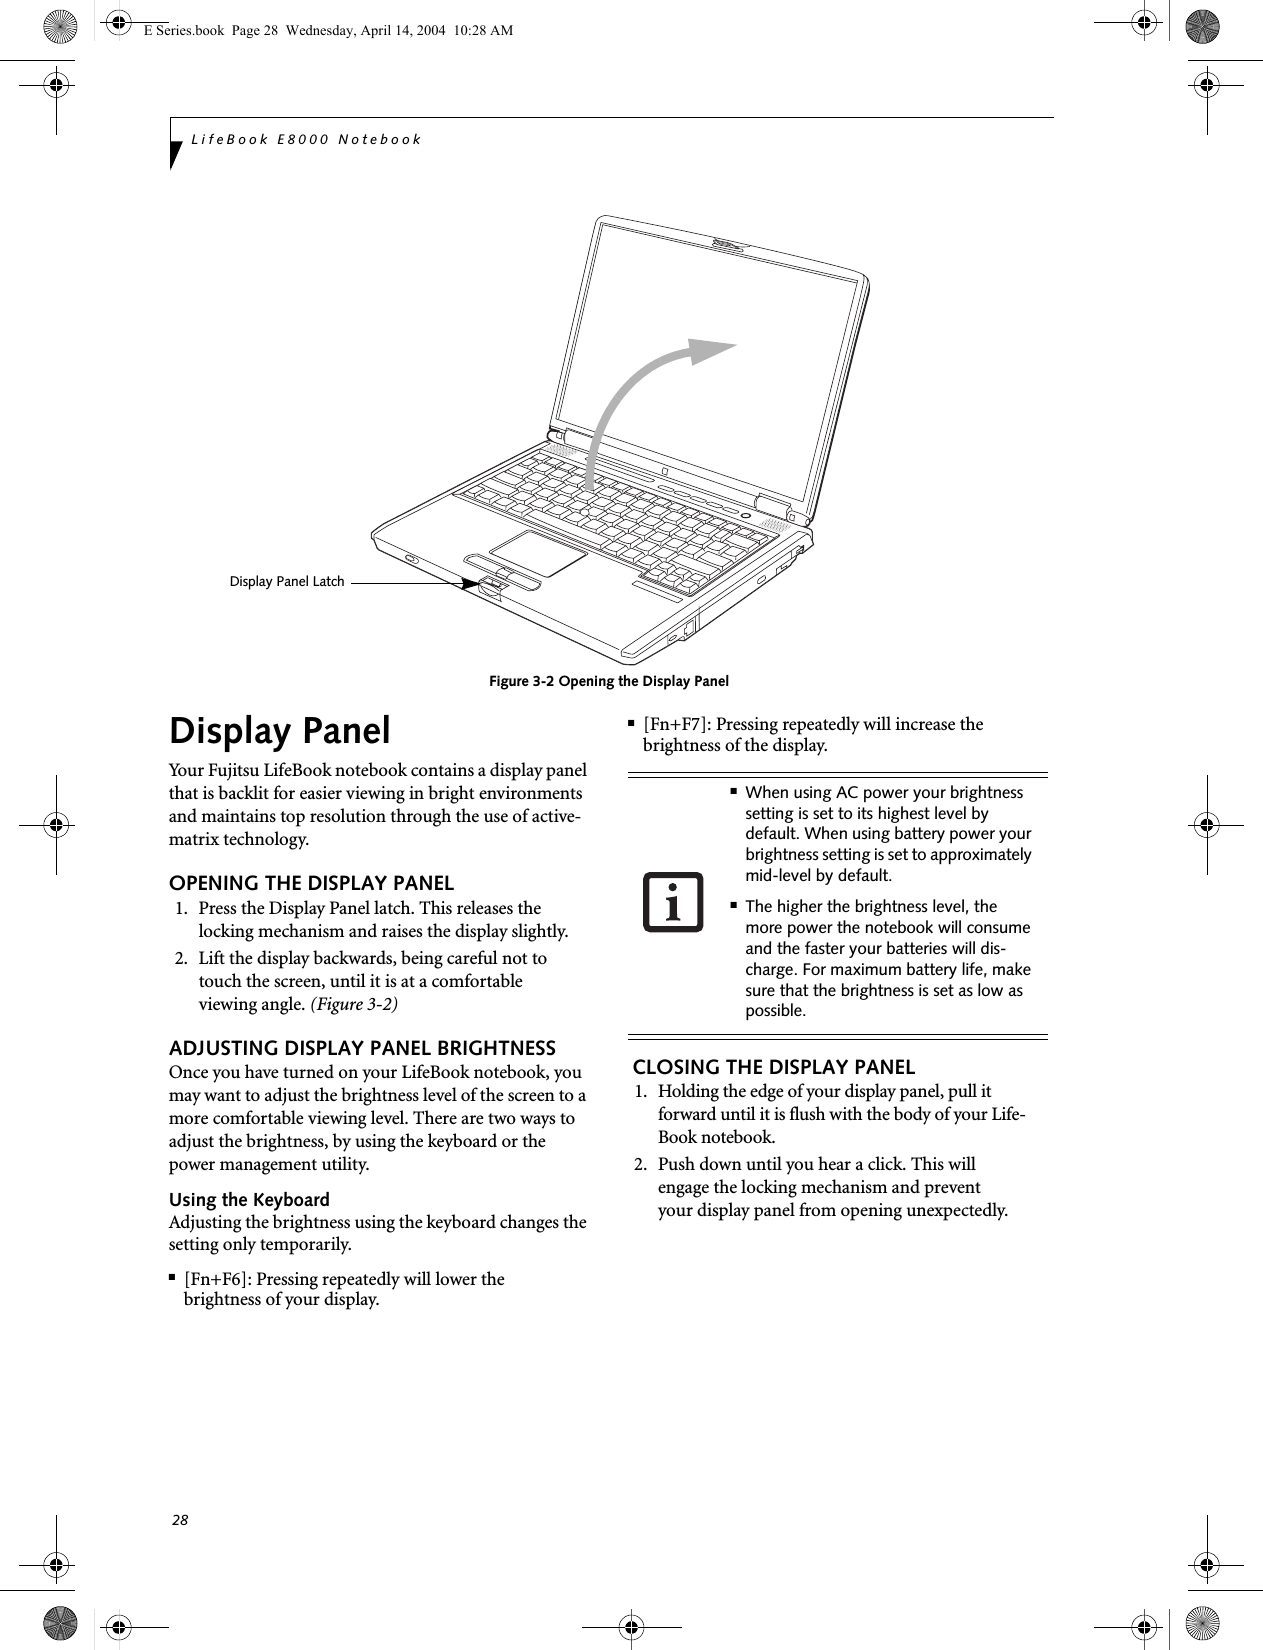 28LifeBook E8000 NotebookFigure 3-2 Opening the Display PanelDisplay PanelYour Fujitsu LifeBook notebook contains a display panel that is backlit for easier viewing in bright environments and maintains top resolution through the use of active-matrix technology. OPENING THE DISPLAY PANEL1. Press the Display Panel latch. This releases the locking mechanism and raises the display slightly.2. Lift the display backwards, being careful not to touch the screen, until it is at a comfortableviewing angle. (Figure 3-2)ADJUSTING DISPLAY PANEL BRIGHTNESSOnce you have turned on your LifeBook notebook, you may want to adjust the brightness level of the screen to a more comfortable viewing level. There are two ways to adjust the brightness, by using the keyboard or the power management utility. Using the KeyboardAdjusting the brightness using the keyboard changes the setting only temporarily. ■[Fn+F6]: Pressing repeatedly will lower thebrightness of your display.■[Fn+F7]: Pressing repeatedly will increase thebrightness of the display. CLOSING THE DISPLAY PANEL1. Holding the edge of your display panel, pull it forward until it is flush with the body of your Life-Book notebook. 2. Push down until you hear a click. This willengage the locking mechanism and preventyour display panel from opening unexpectedly.Display Panel Latch■When using AC power your brightness setting is set to its highest level by default. When using battery power your brightness setting is set to approximately mid-level by default.■The higher the brightness level, the more power the notebook will consume and the faster your batteries will dis-charge. For maximum battery life, make sure that the brightness is set as low as possible.E Series.book  Page 28  Wednesday, April 14, 2004  10:28 AM